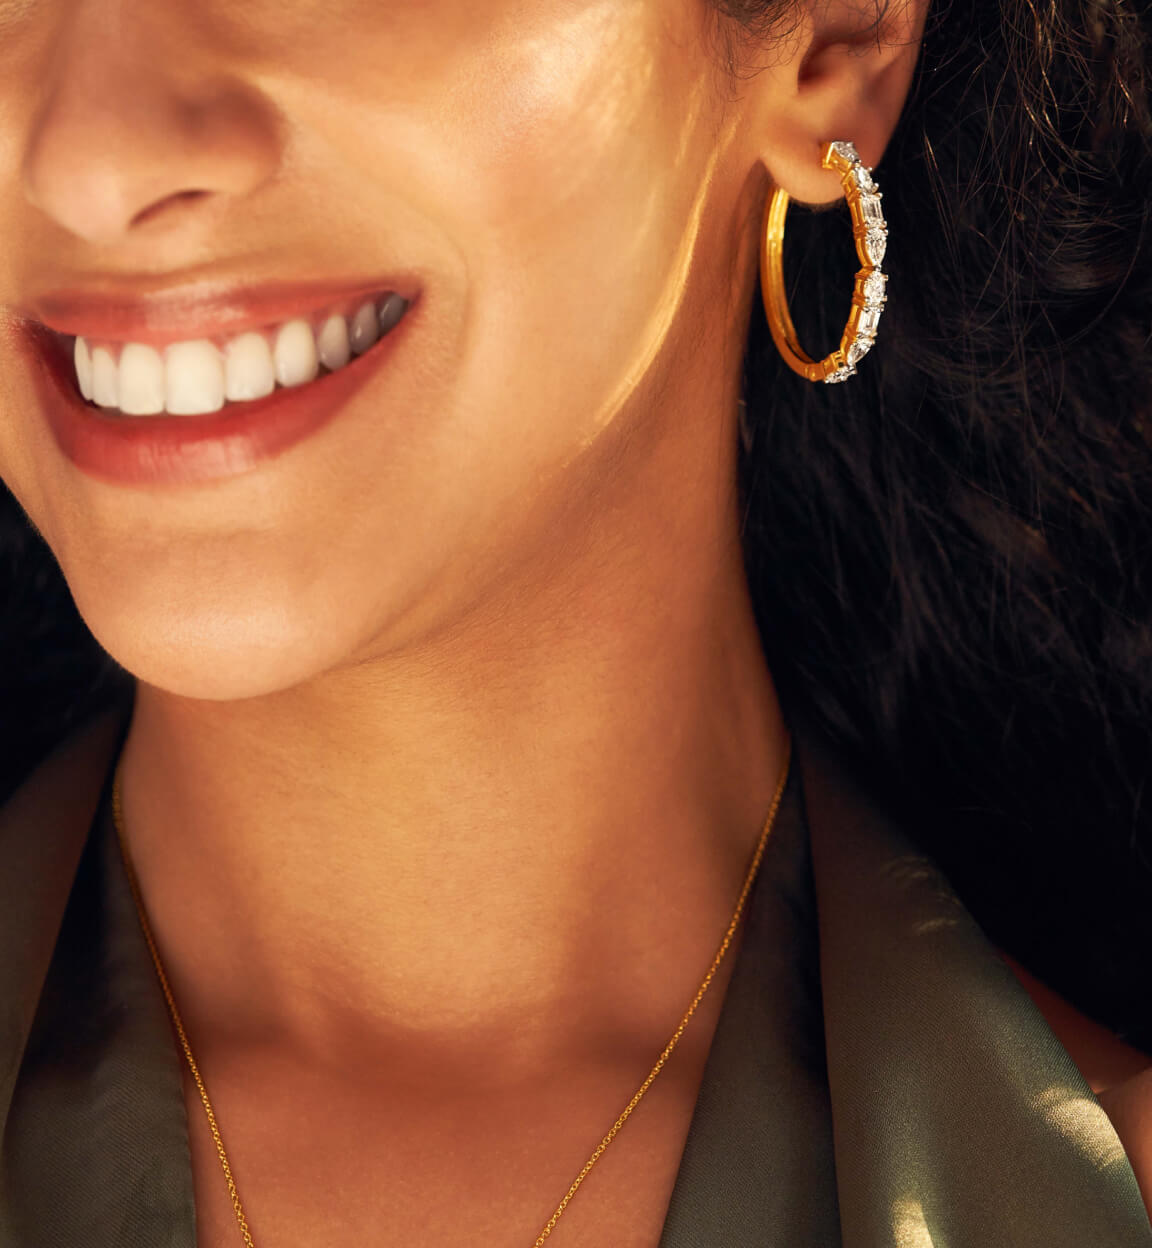 Trendy and Chic: Lightweight Earring Styles for Every Occasion